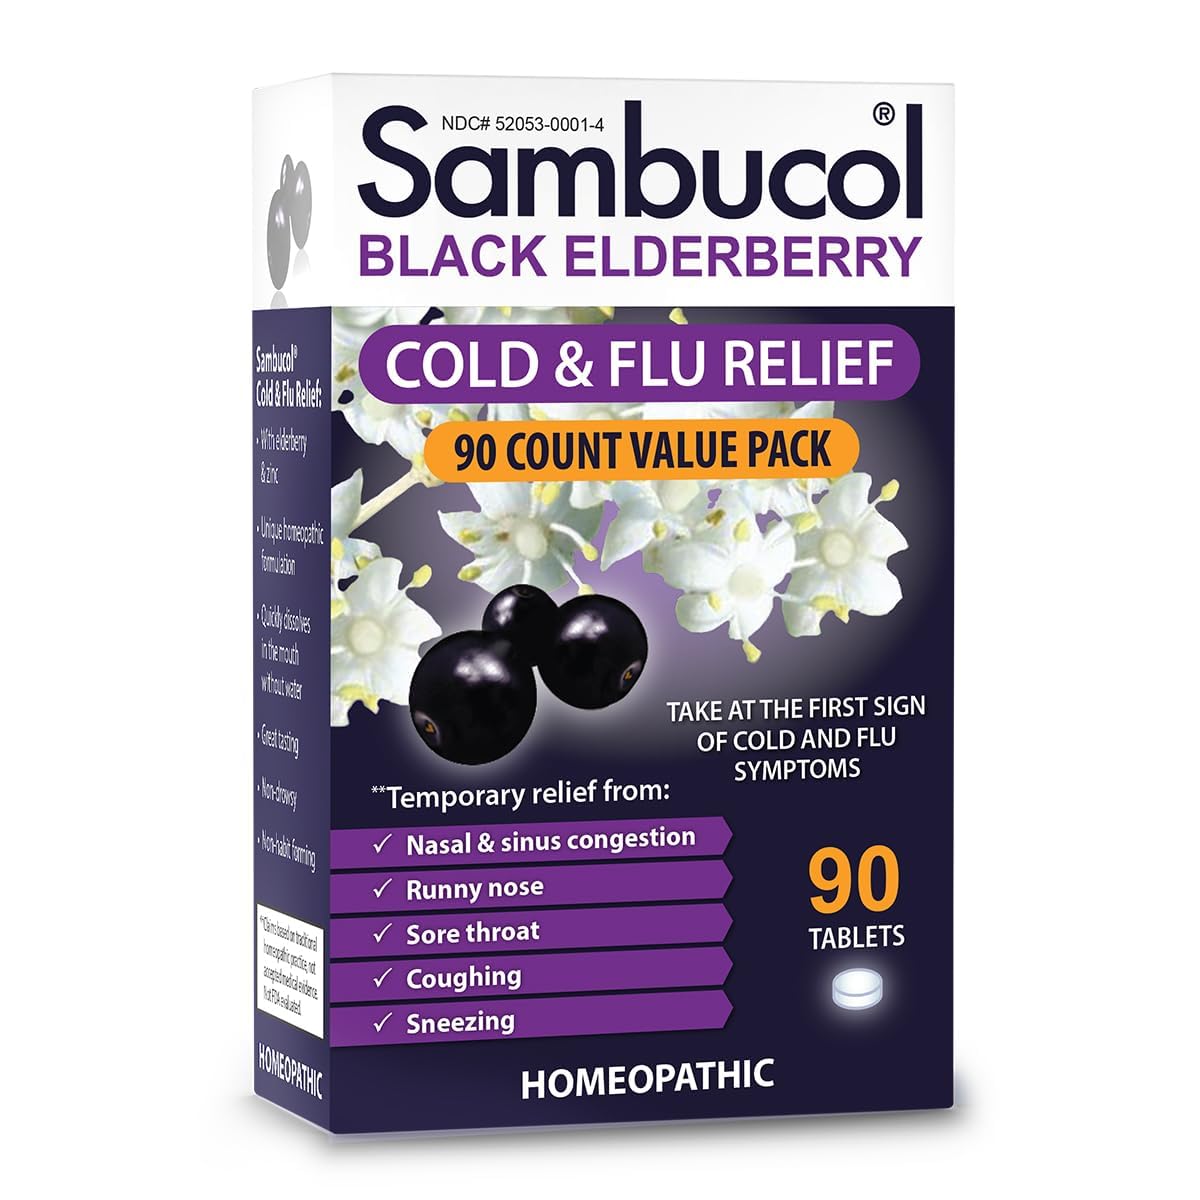 Sambucol Cold and Flu Relief Tablets - Homeopathic Cold Medicine, Nasal & Sinus Congestion Relief, Use for Runny Nose, Sore Thro